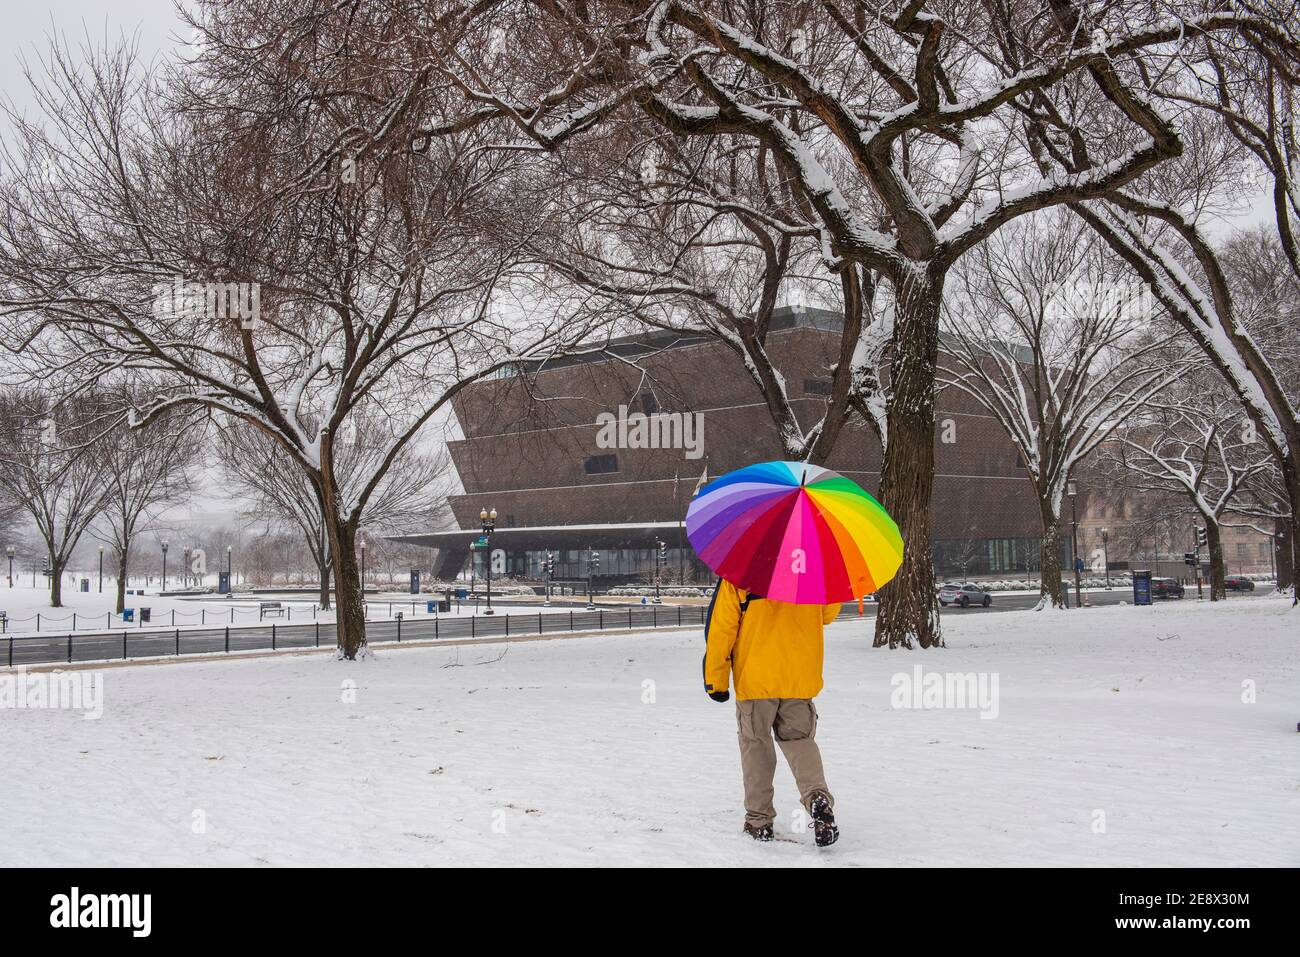 A man with a colorful umbrella walks past the Smithsonian National Museum of African American History and Culture (NMAAHC) during a snowy day in Washi Stock Photo